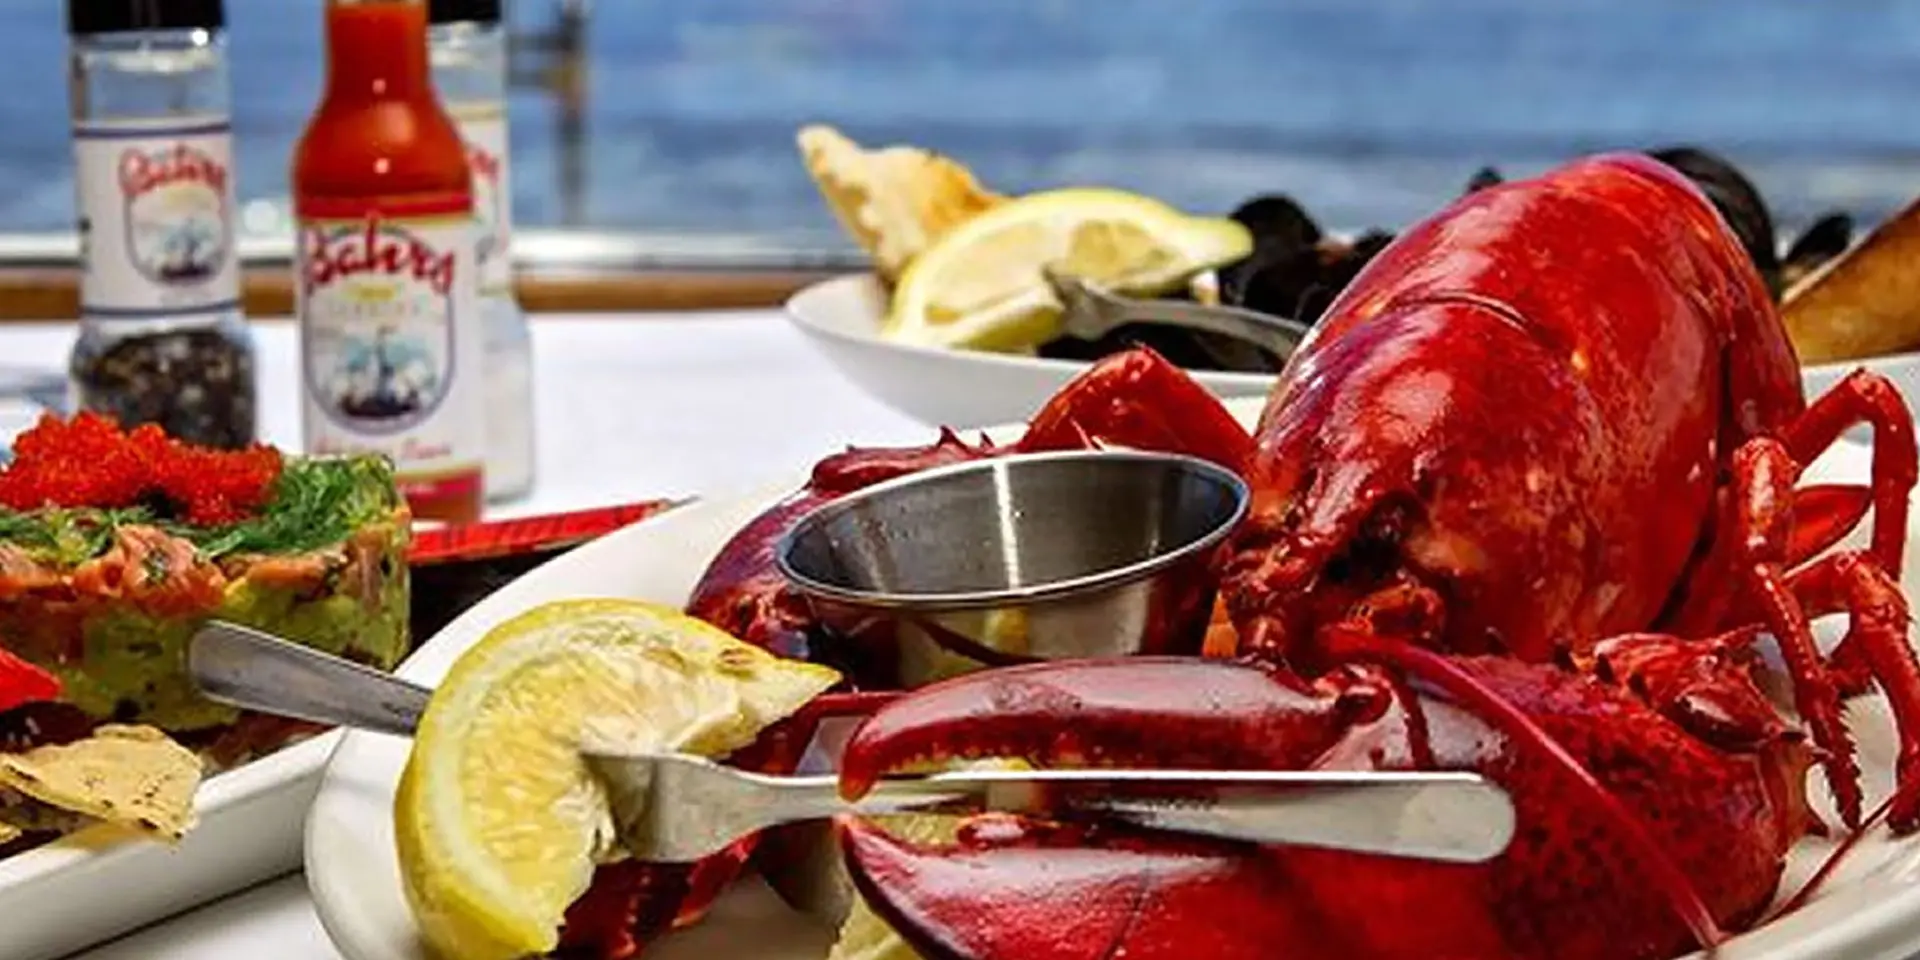 A lobster dinner with lemon and other seafood.